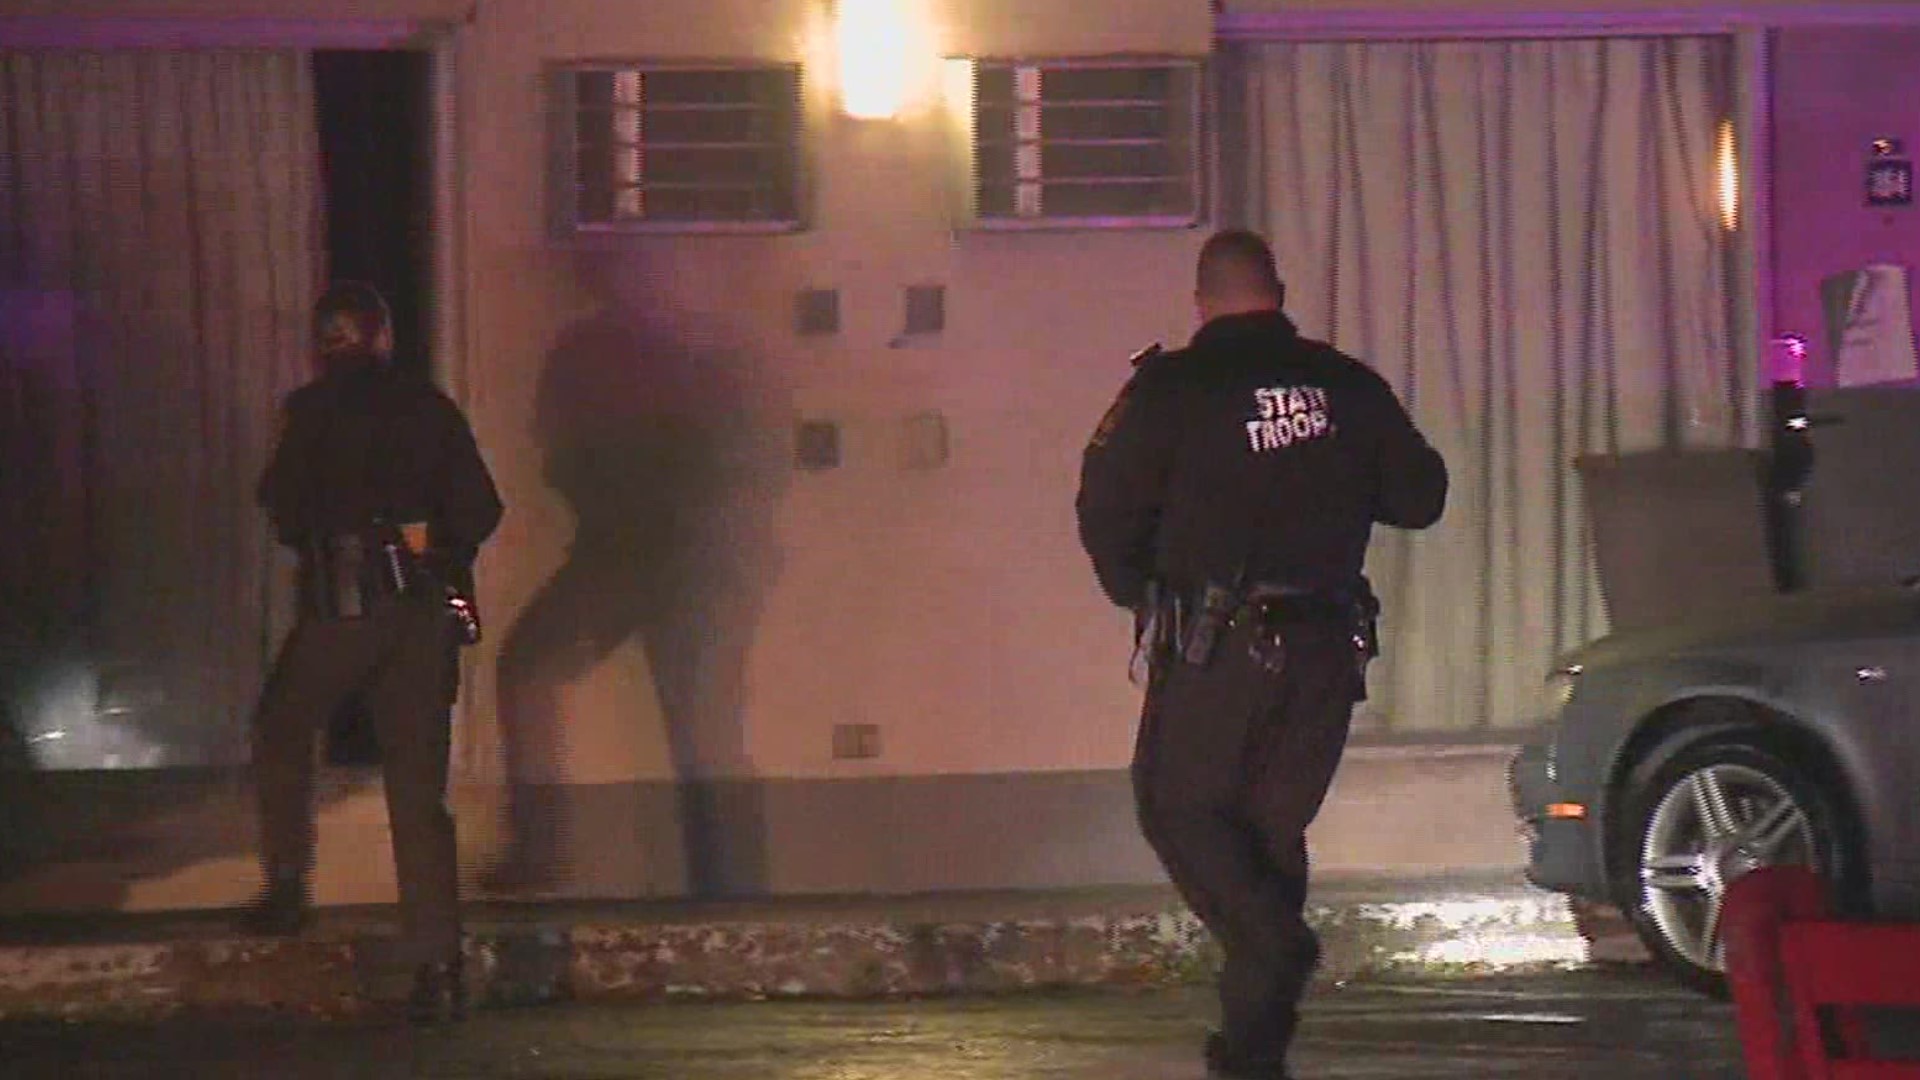 A woman was shot Monday night at a motel in Monroe County.